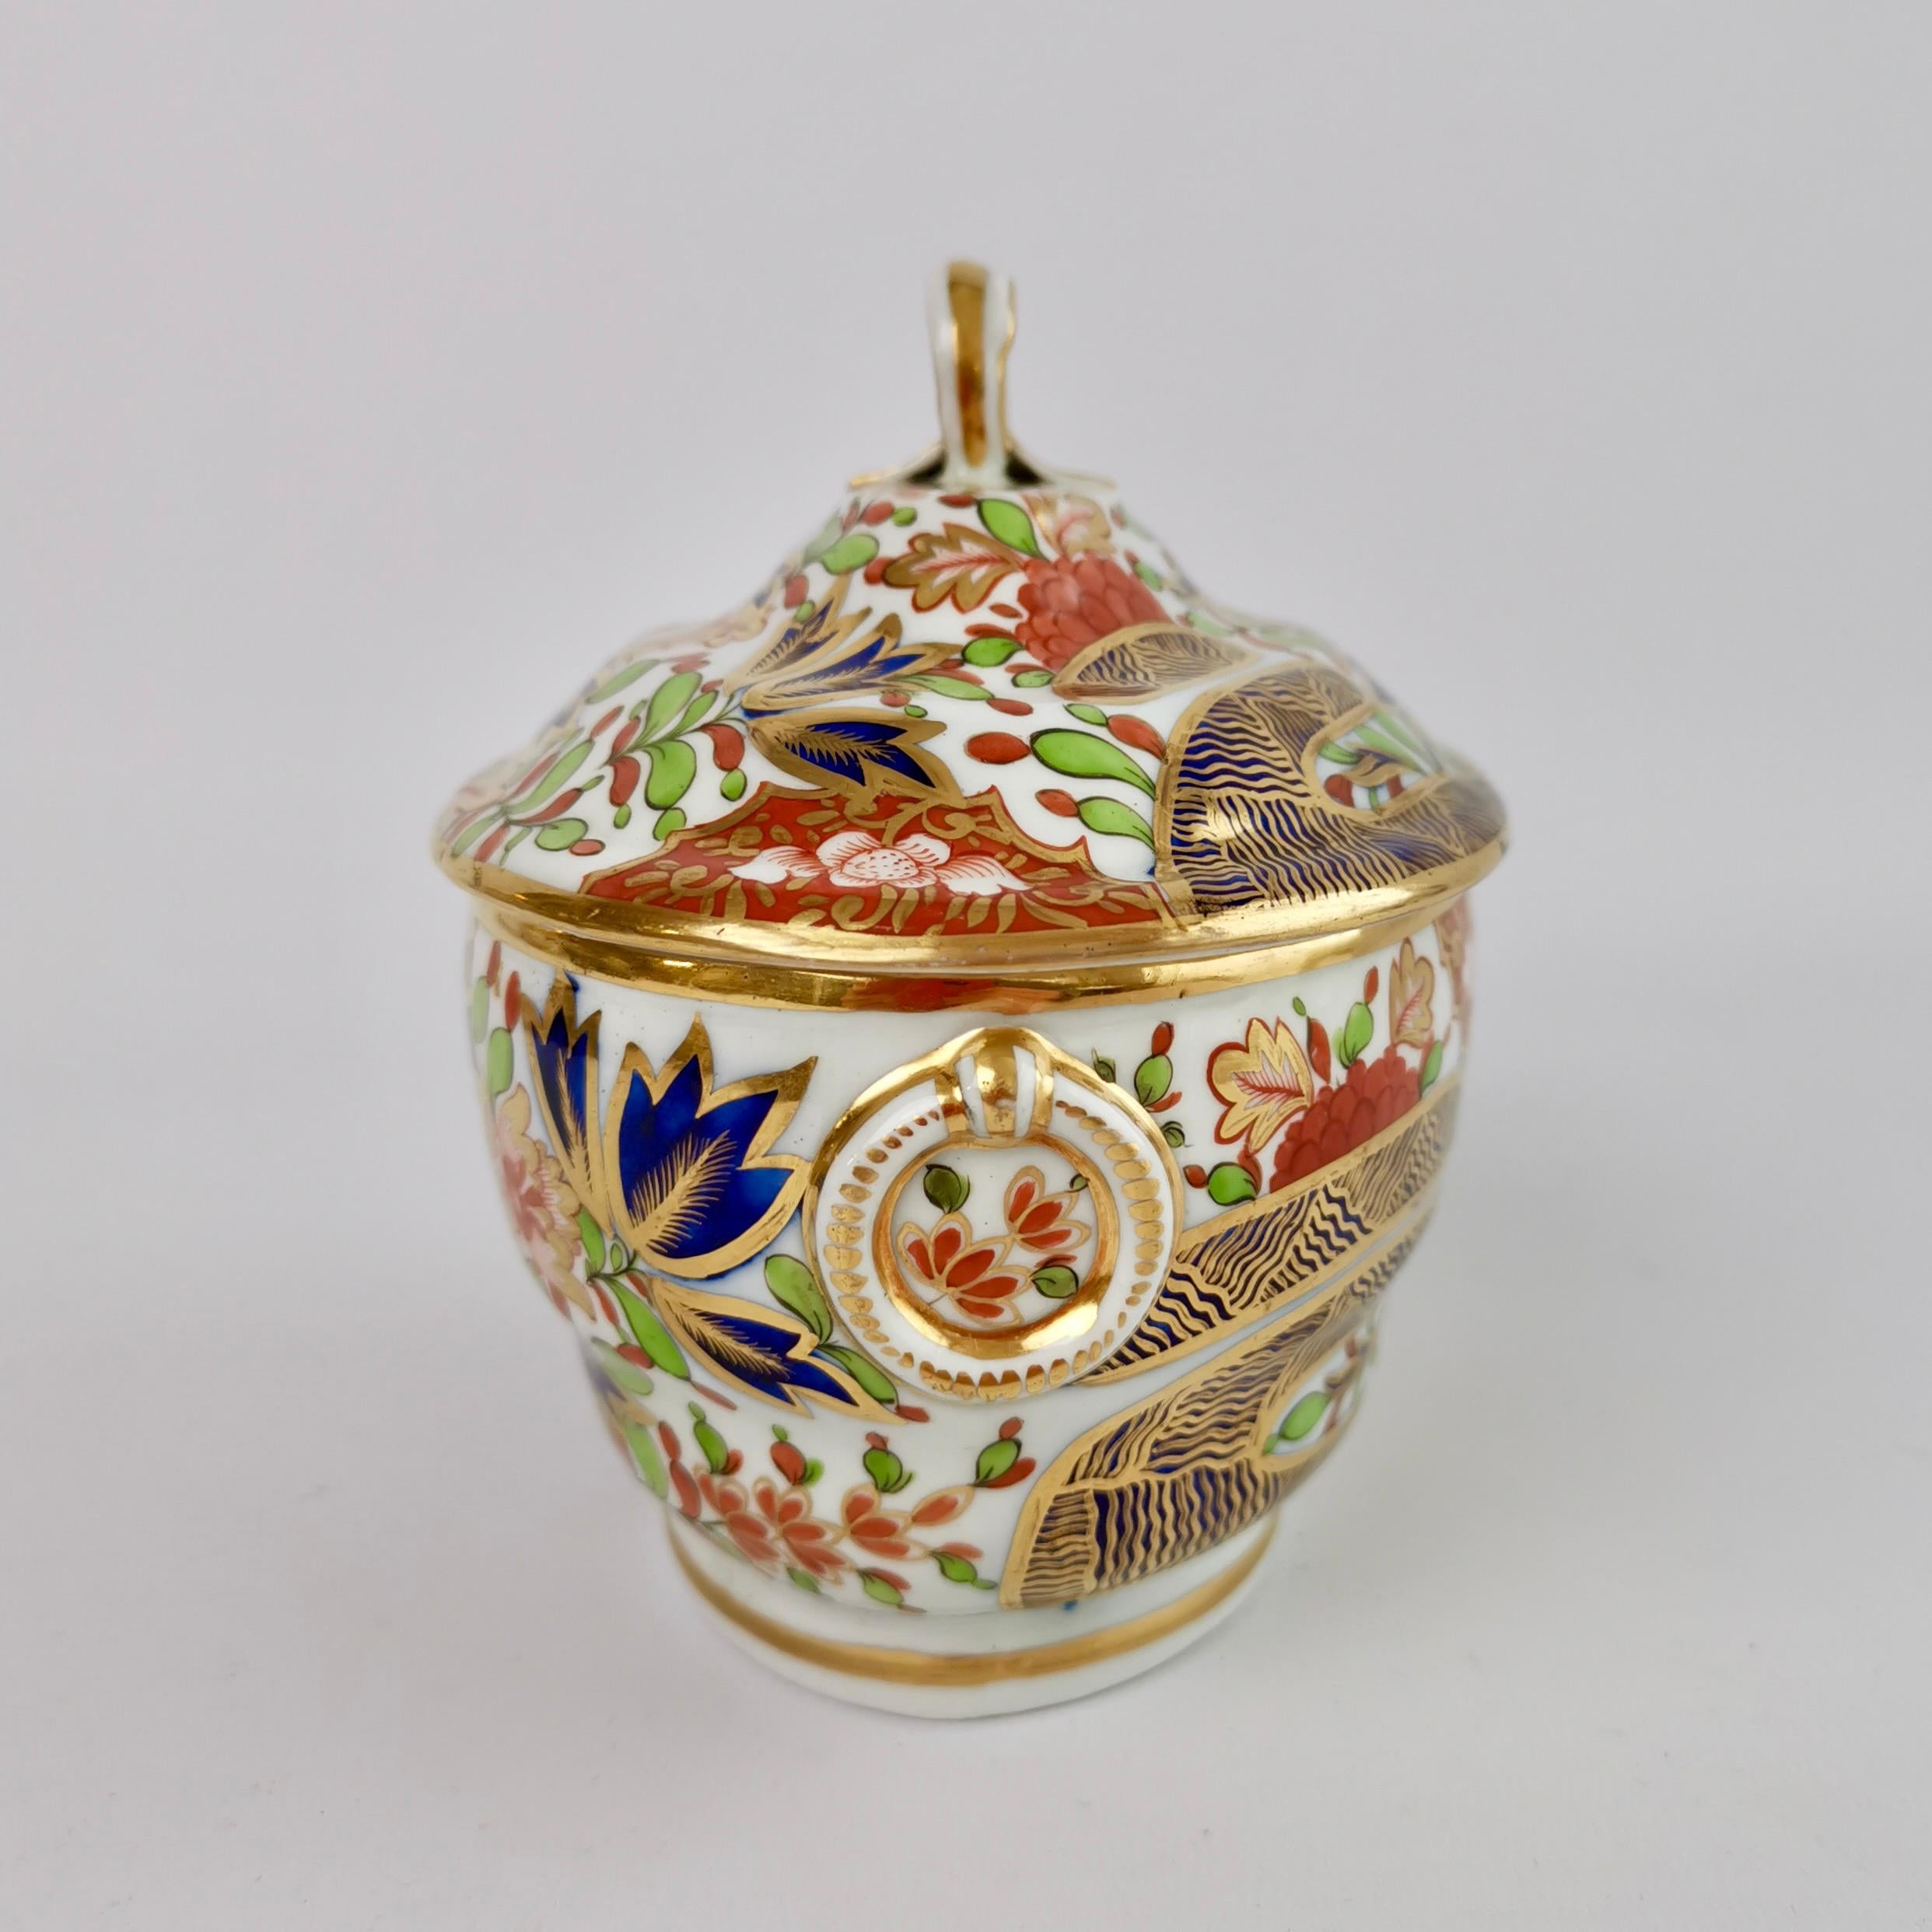 This is a beautiful sucrier and cover, or sugar pot, made by Chamberlains Worcester between 1802 and 1805. It is decorated with the very famous 